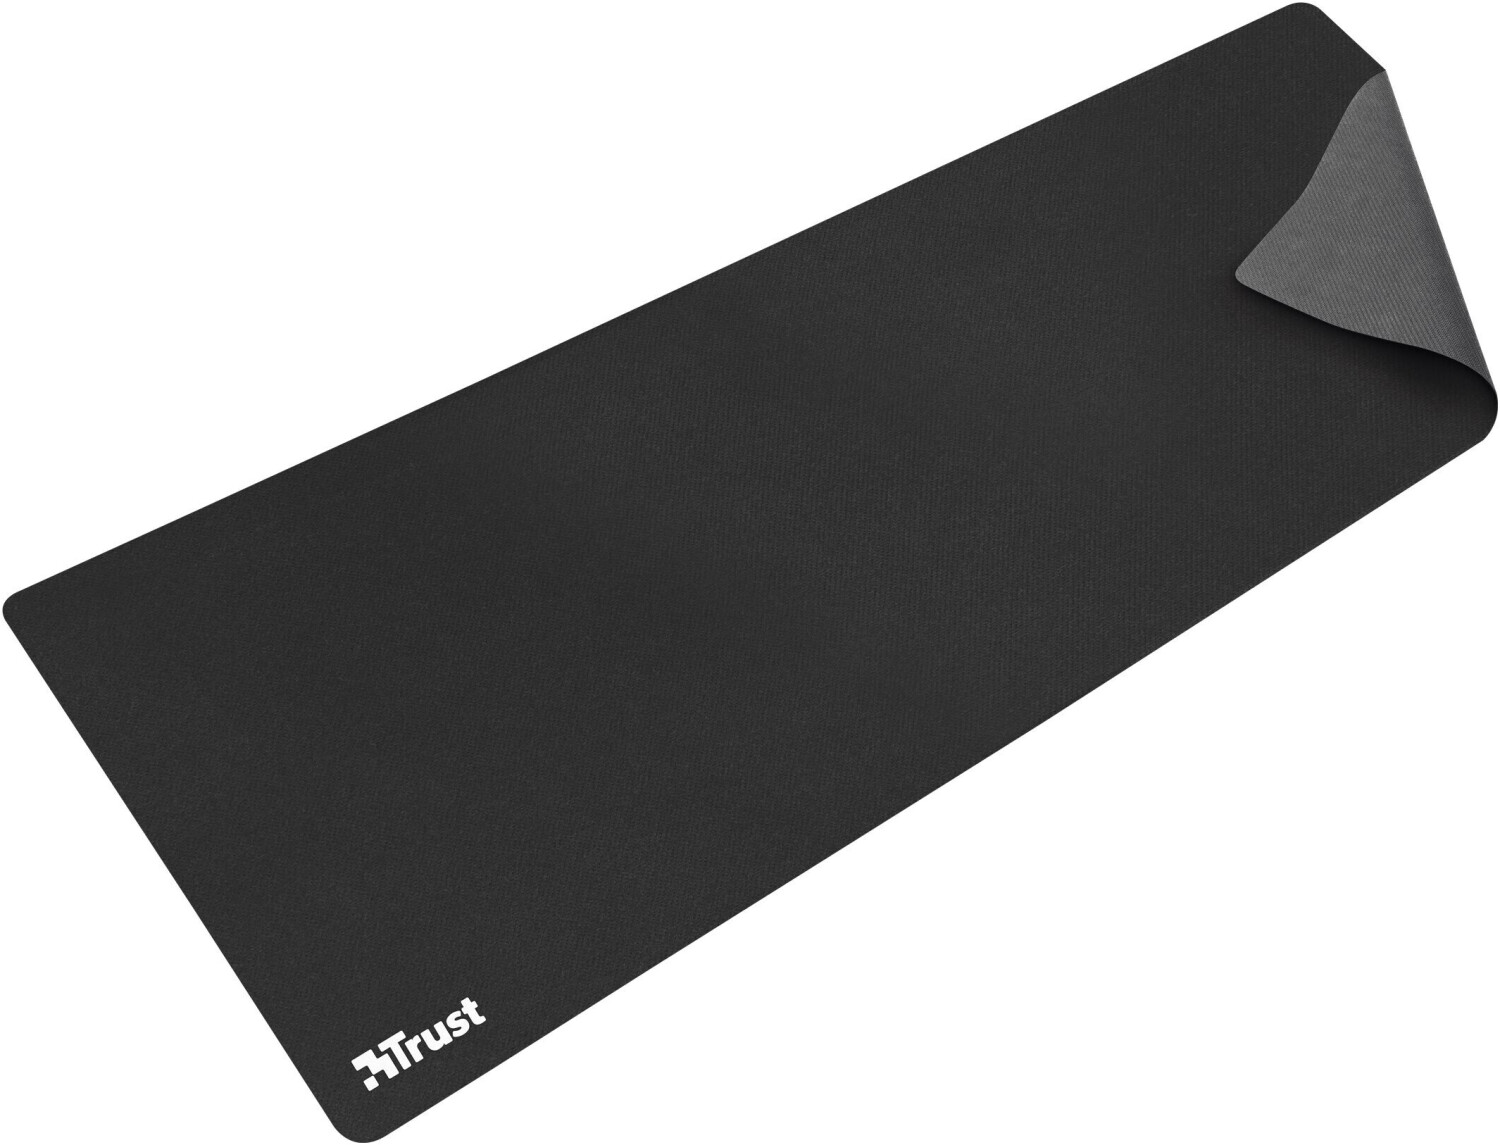 245014 Gel Mouse Pad - Equip